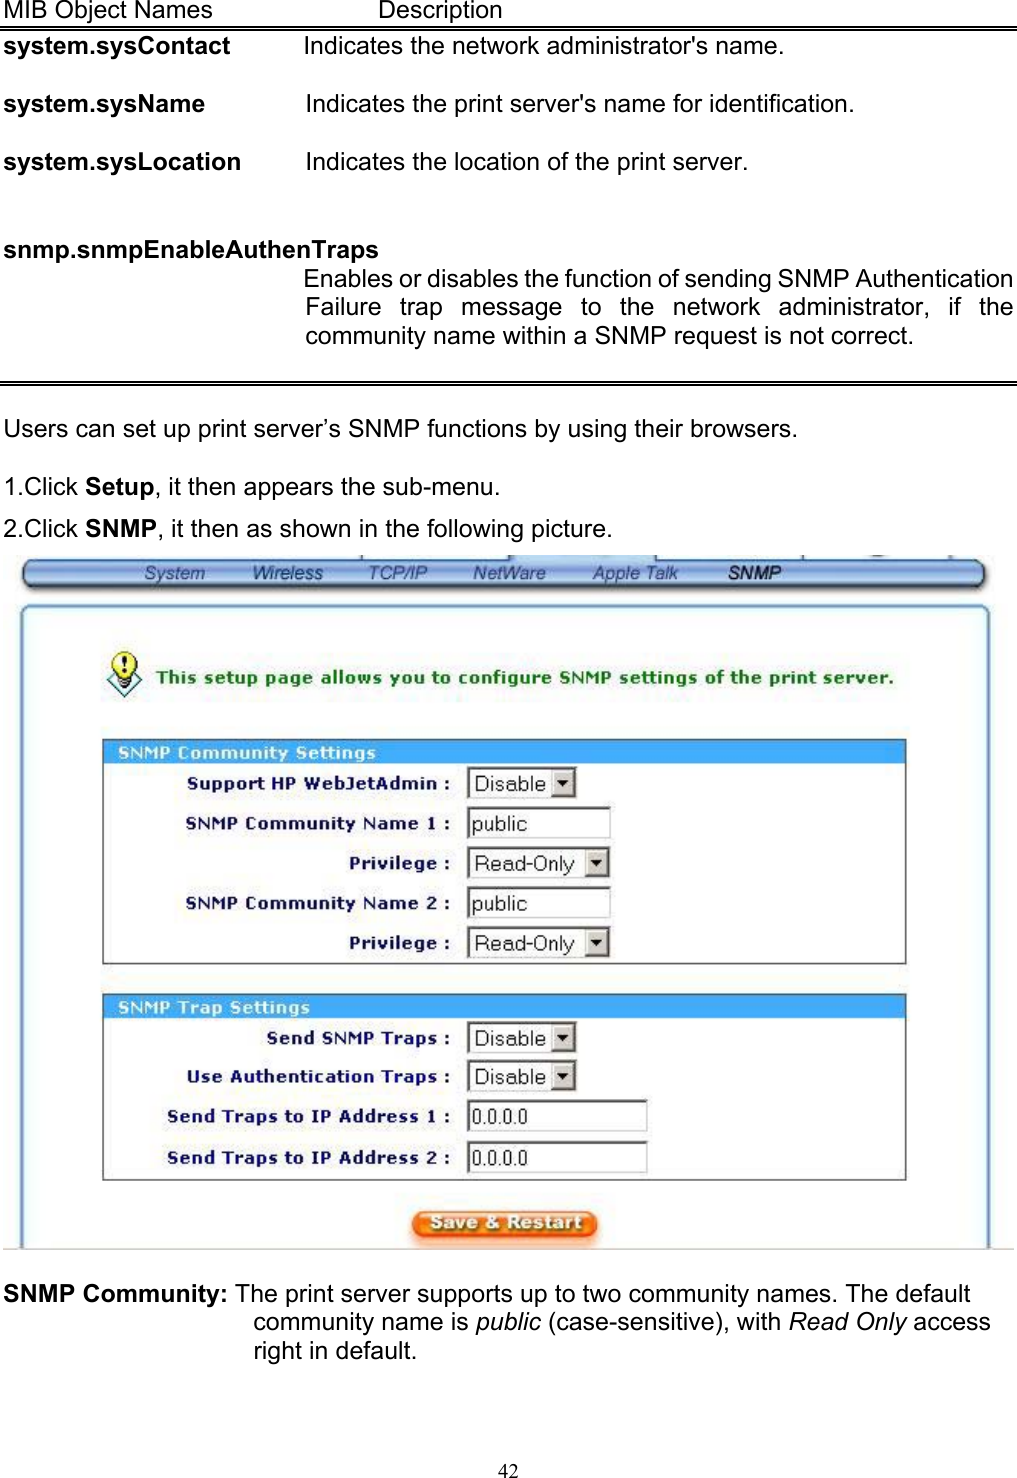   42 MIB Object Names      Description system.sysContact  Indicates the network administrator&apos;s name.  system.sysName  Indicates the print server&apos;s name for identification.  system.sysLocation  Indicates the location of the print server.   snmp.snmpEnableAuthenTraps Enables or disables the function of sending SNMP Authentication Failure trap message to the network administrator, if the community name within a SNMP request is not correct.   Users can set up print server’s SNMP functions by using their browsers.  1.Click Setup, it then appears the sub-menu. 2.Click SNMP, it then as shown in the following picture.   SNMP Community: The print server supports up to two community names. The default community name is public (case-sensitive), with Read Only access right in default. 